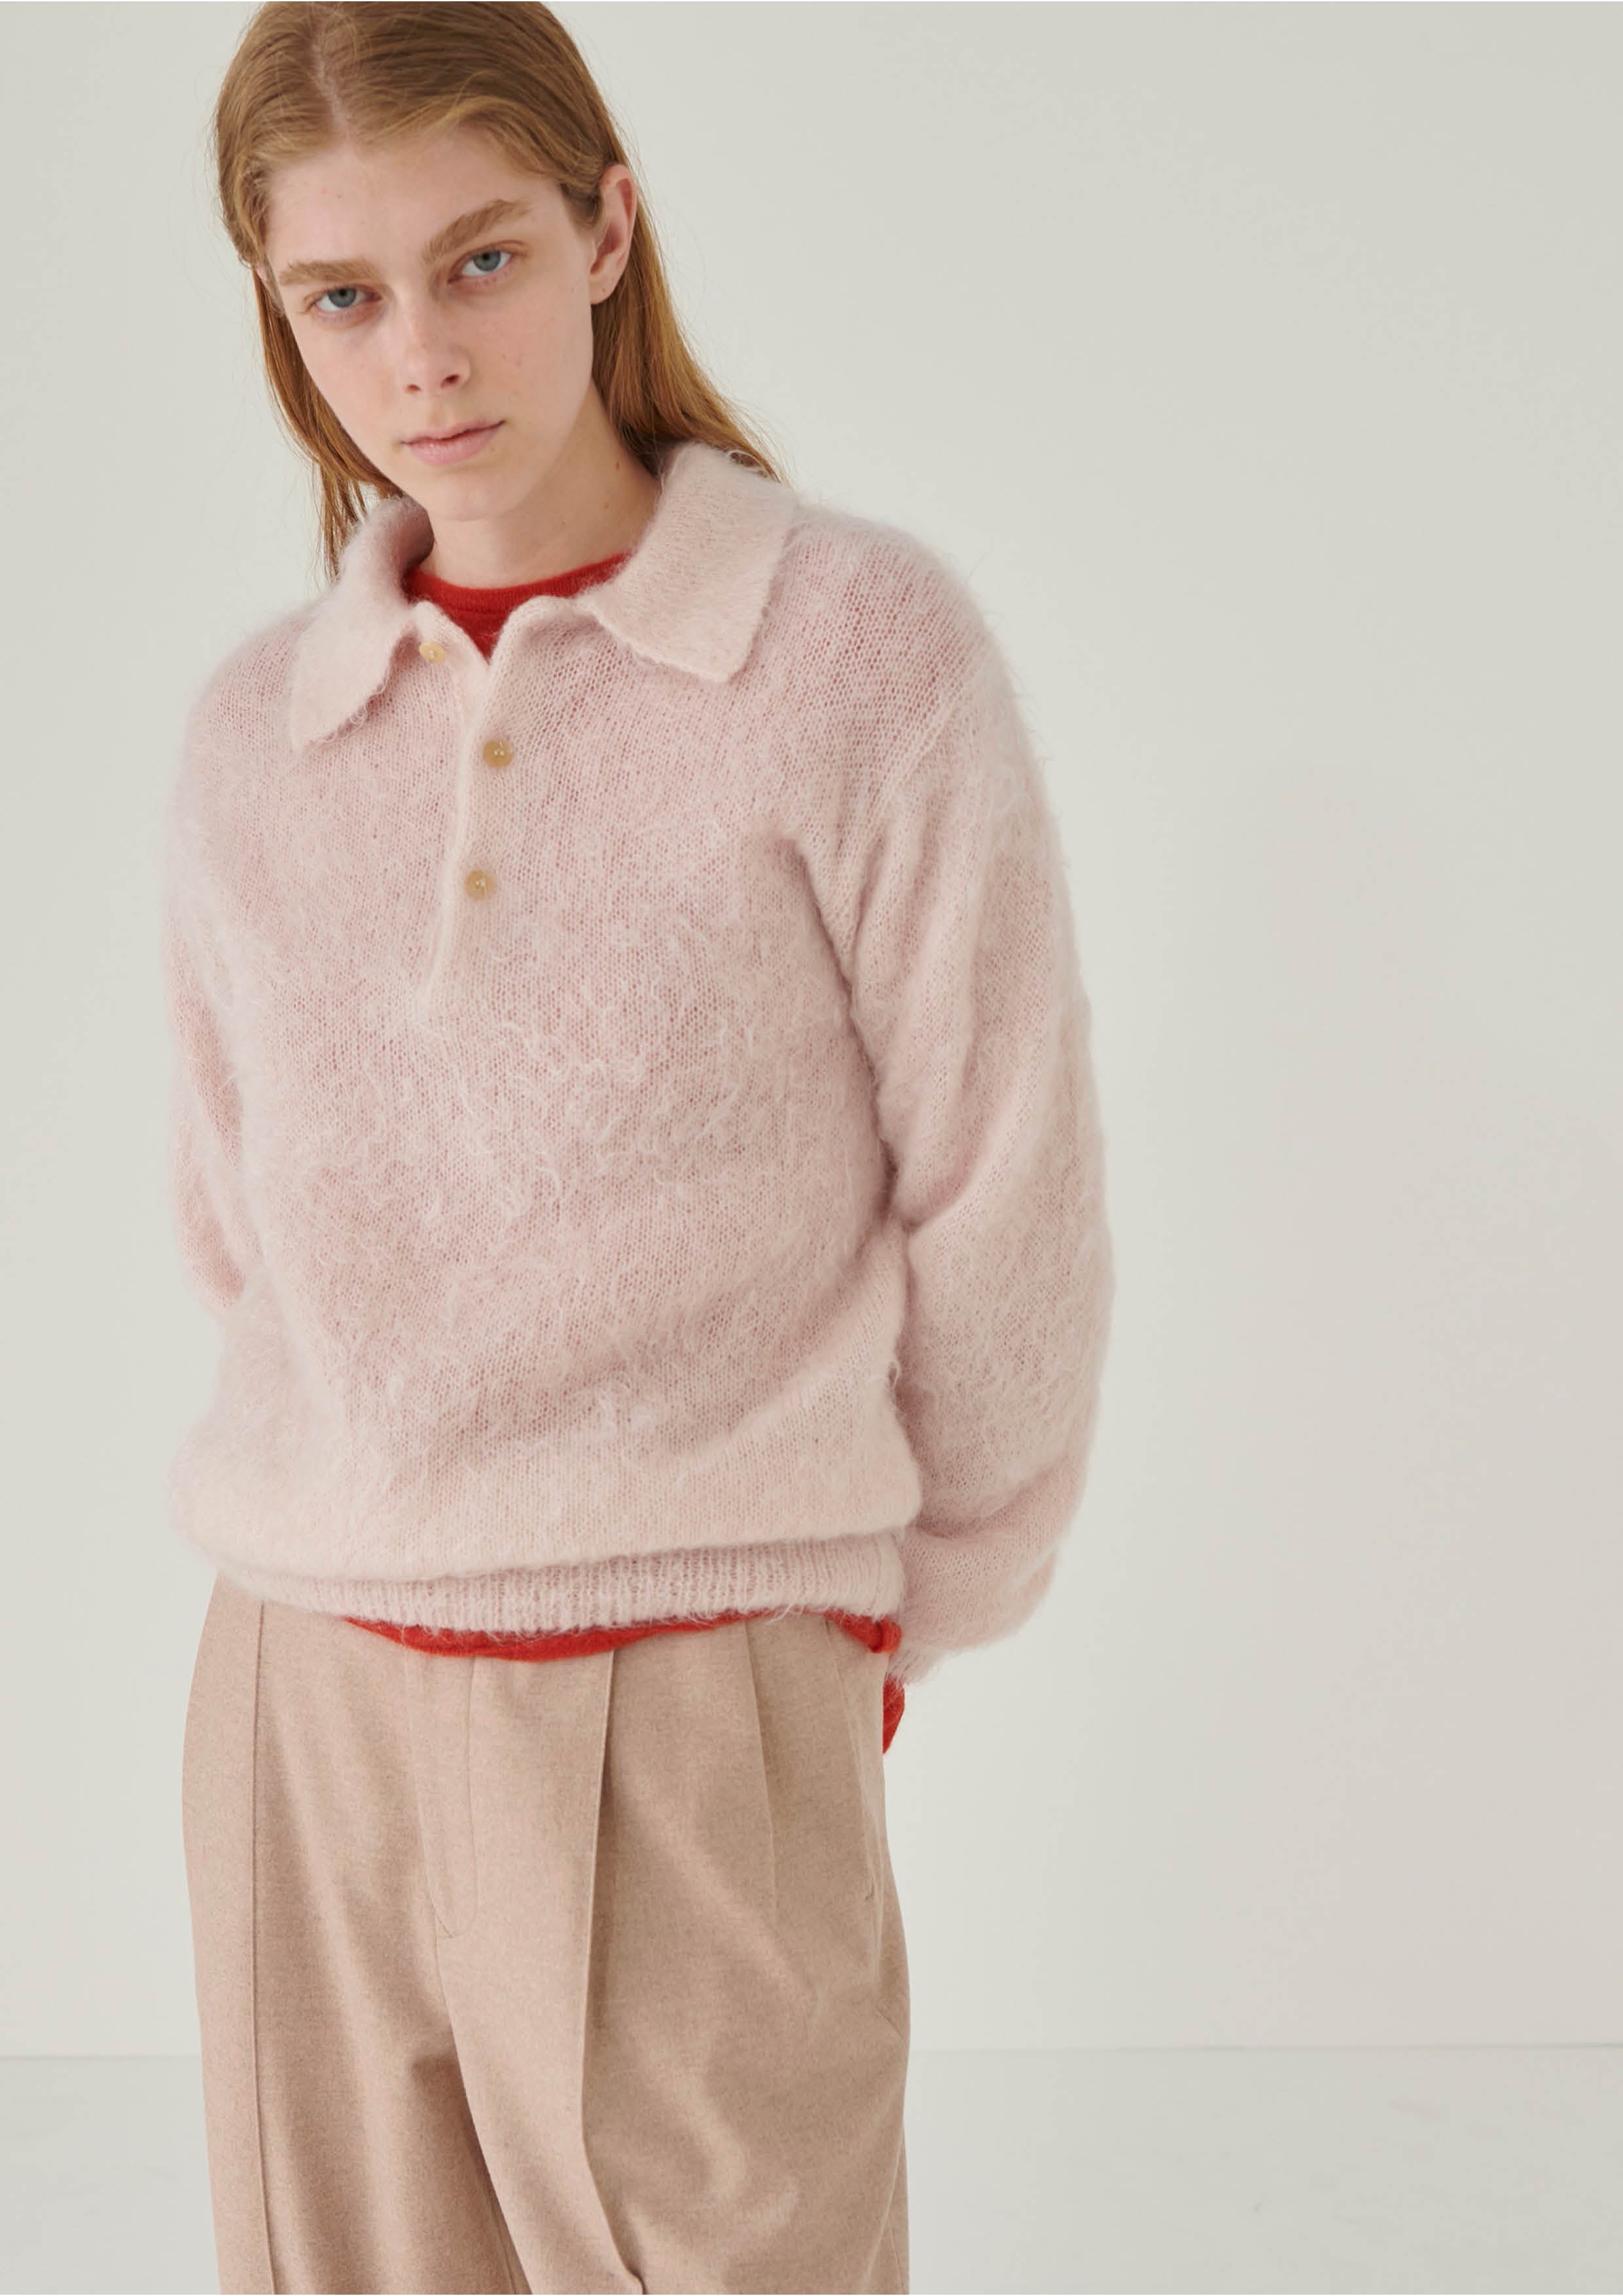 AURALEE - BRUSHED SUPER KID MOHAIR KNIT POLO - LIGHT PINK – SOLAR MTP